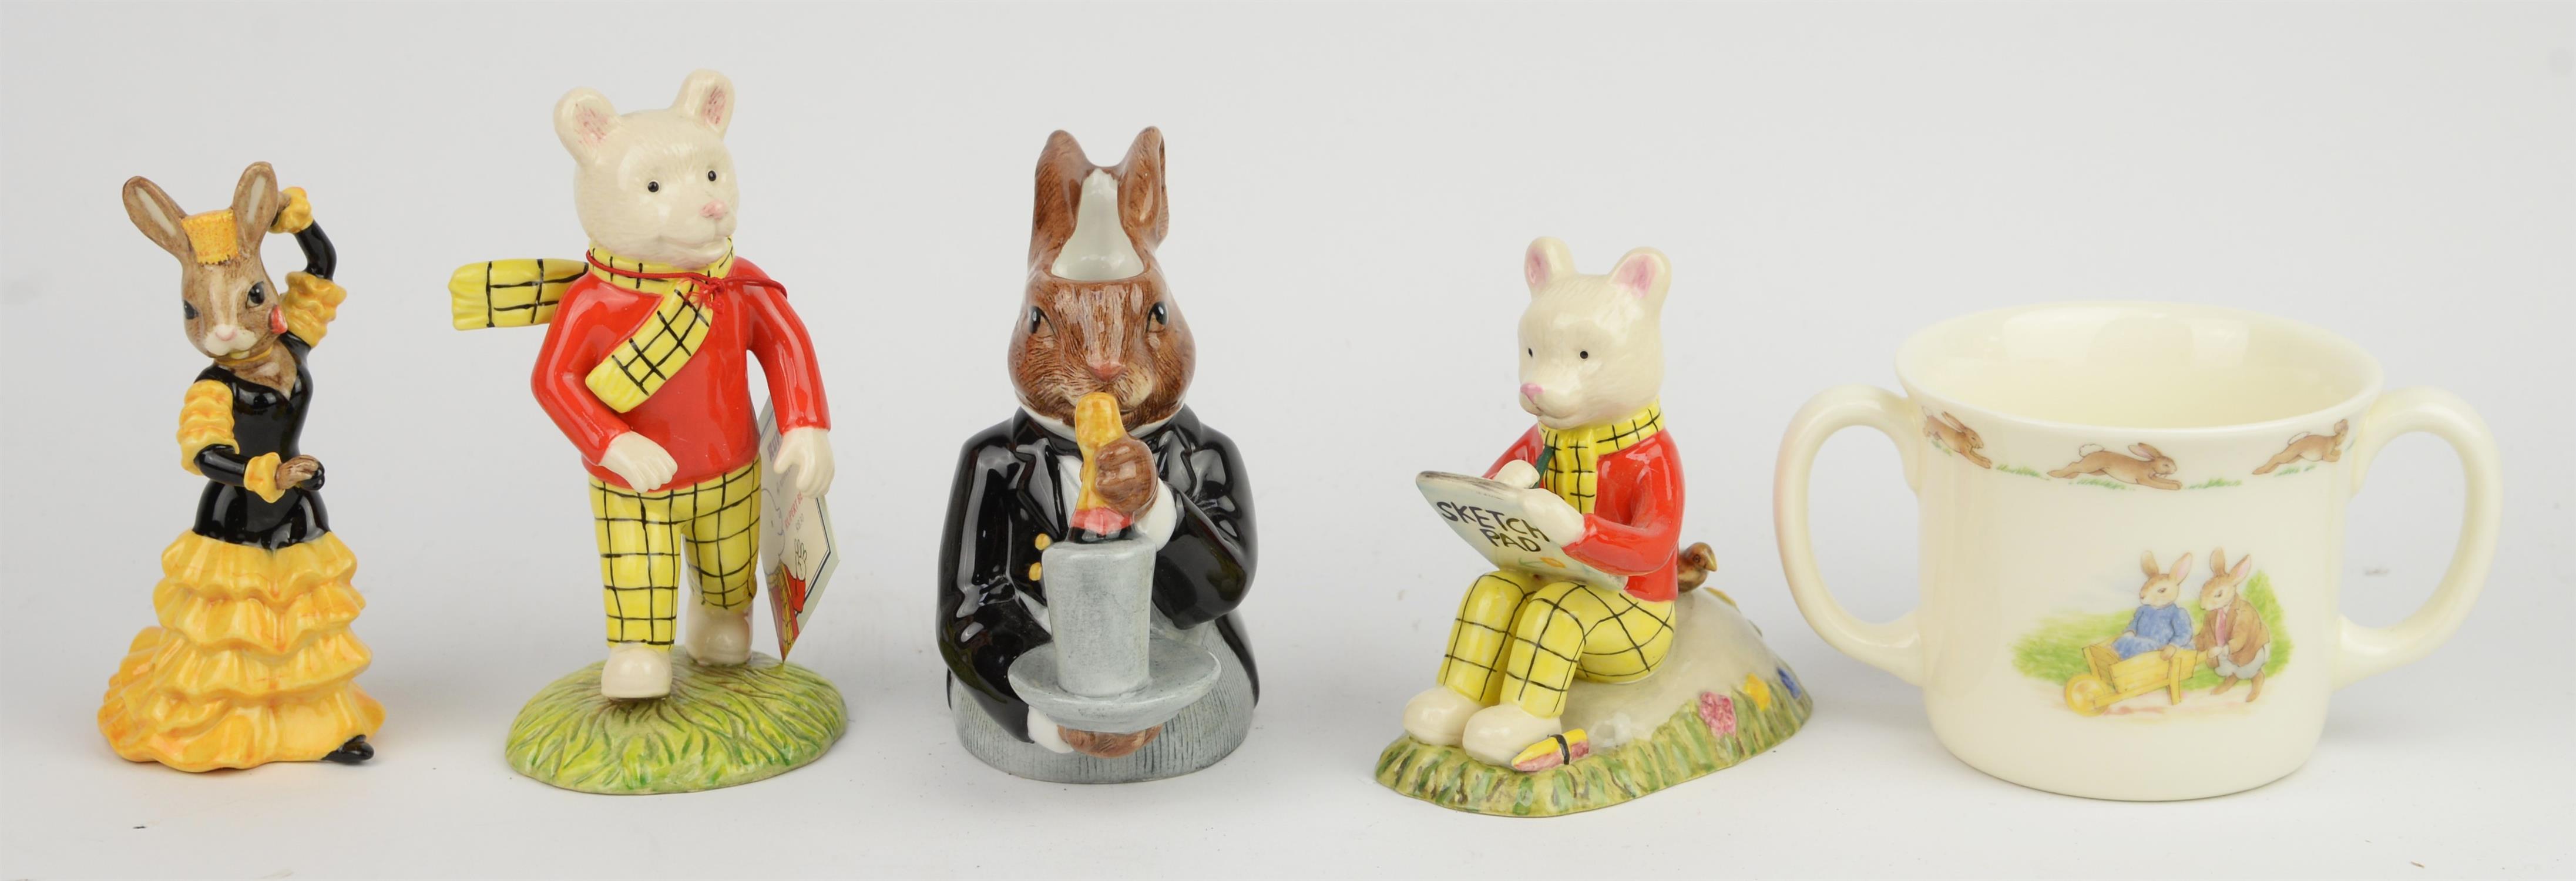 Royal Doulton Rupert bear figures, four boxed figures of Rupert Beat, together with various